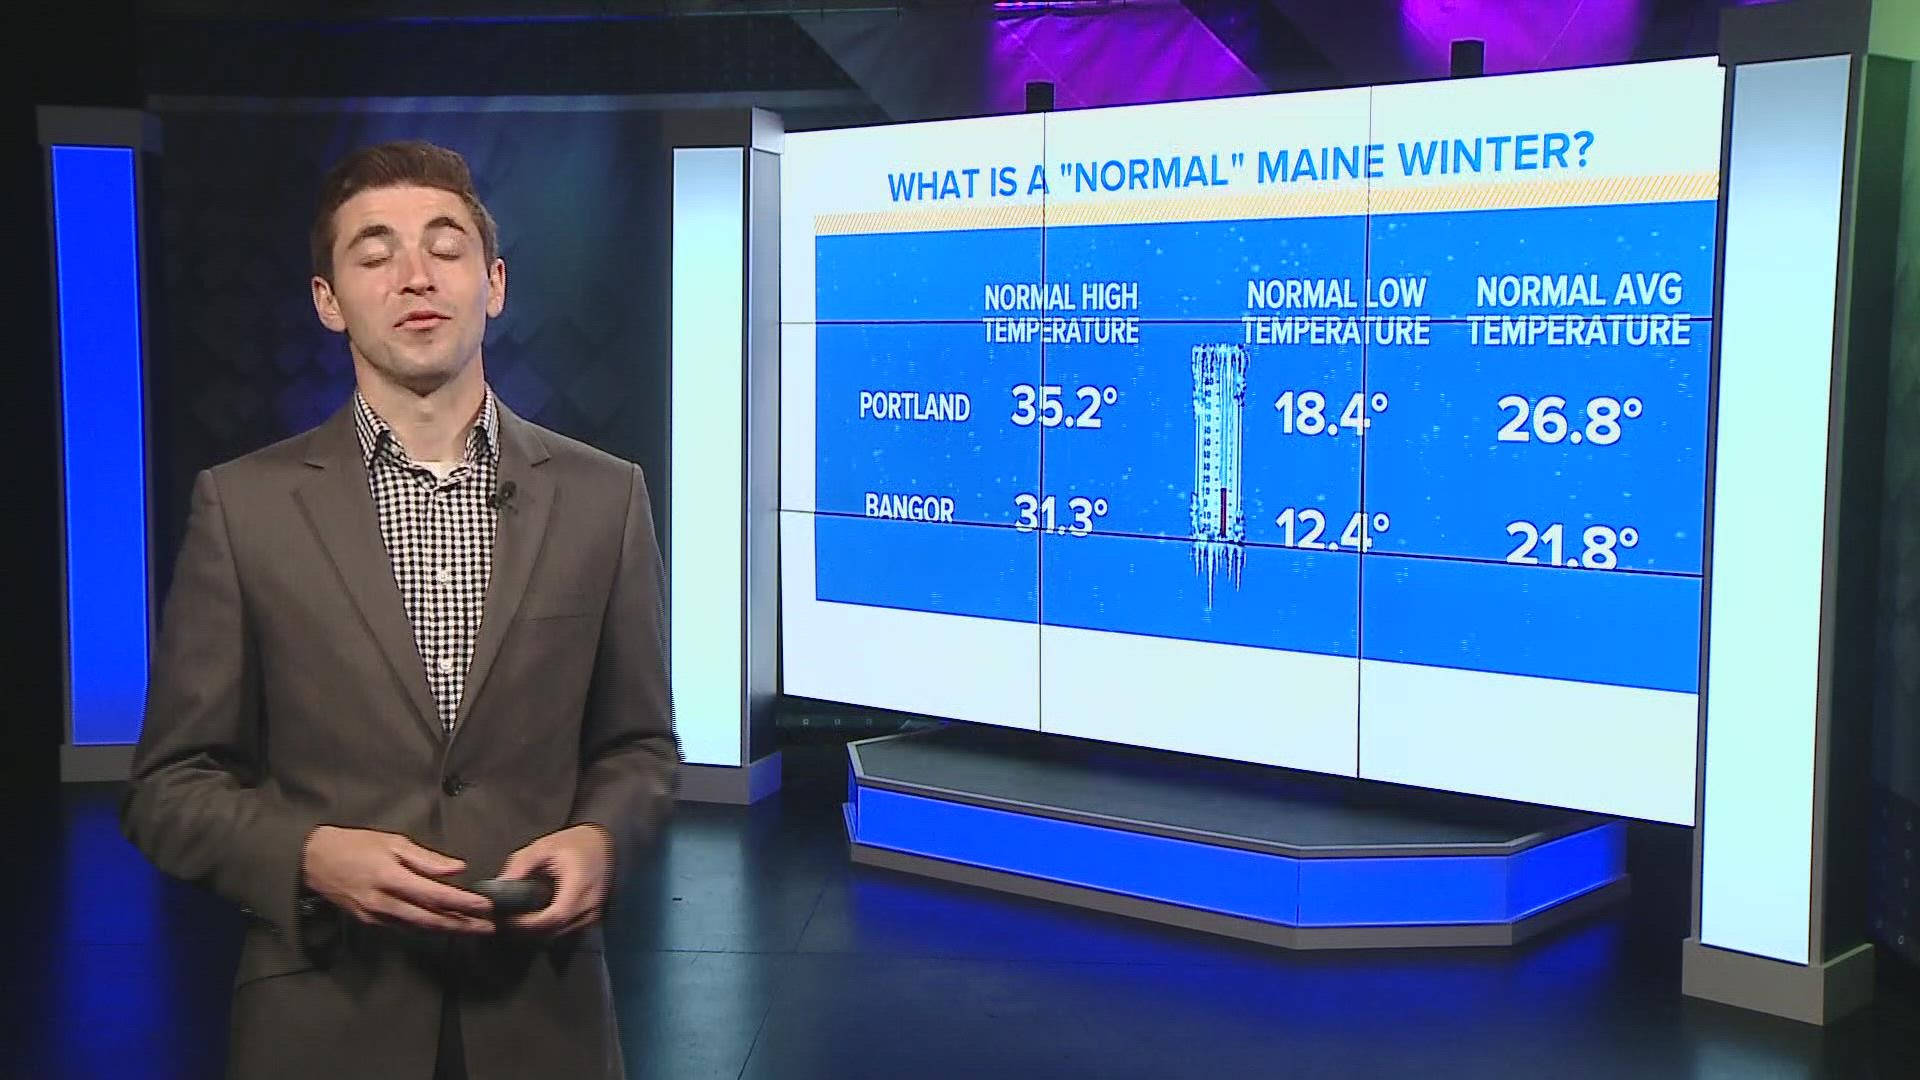 Snowfall deficits in the winter are leading to a potential summer drought.